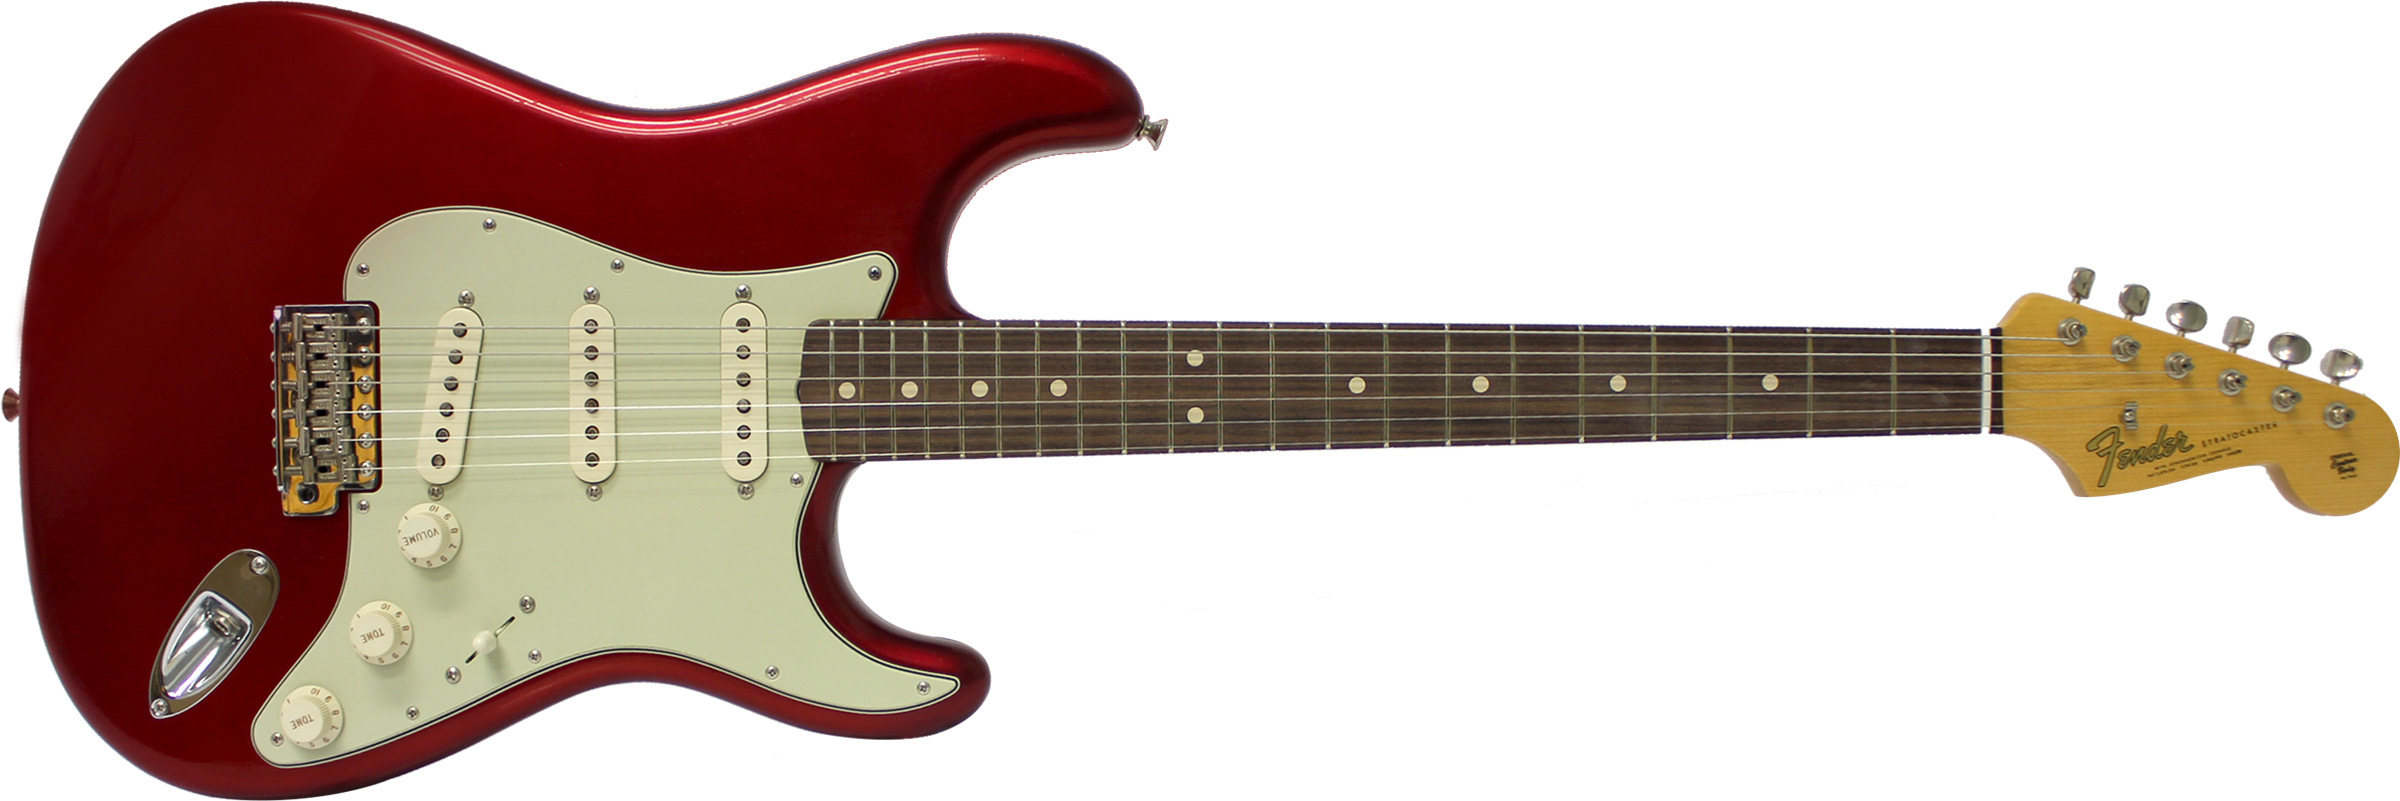 GUITARRA FENDER 64 STRATOCASTER ANNIVERSARY CLOSET CLASSIC 151-9640-809 CANDY APPLE RED